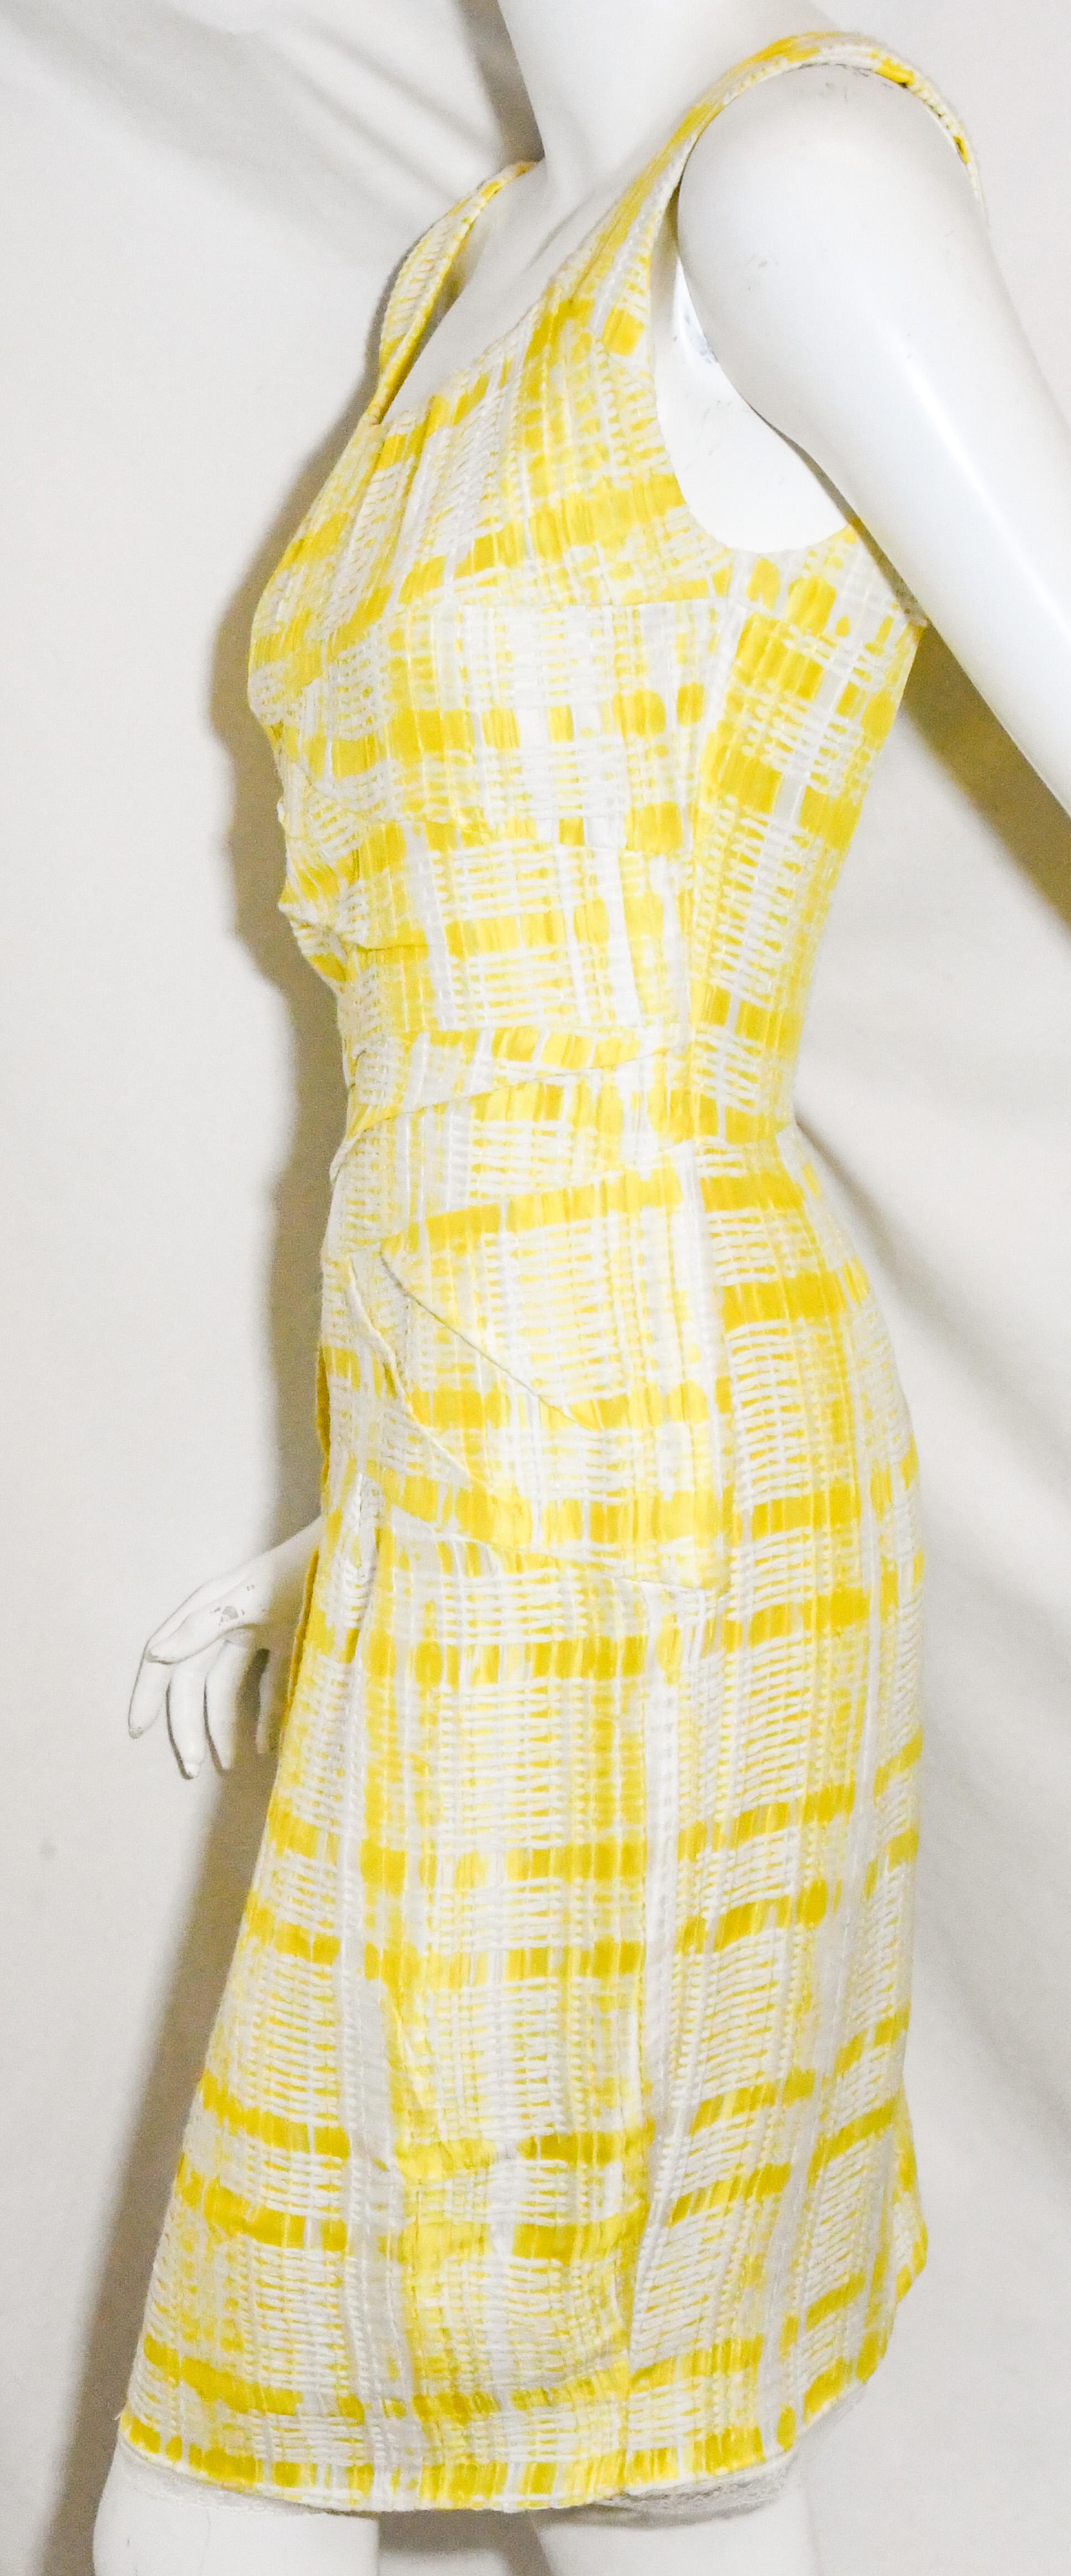 Oscar de la Renta yellow and white check textured fabric includes a scoop neckline and is slightly This dress is elegant yet contemporary.  Dress is lined and is gathered at the neckline and, for closure, includes a long zipper at back with a vent